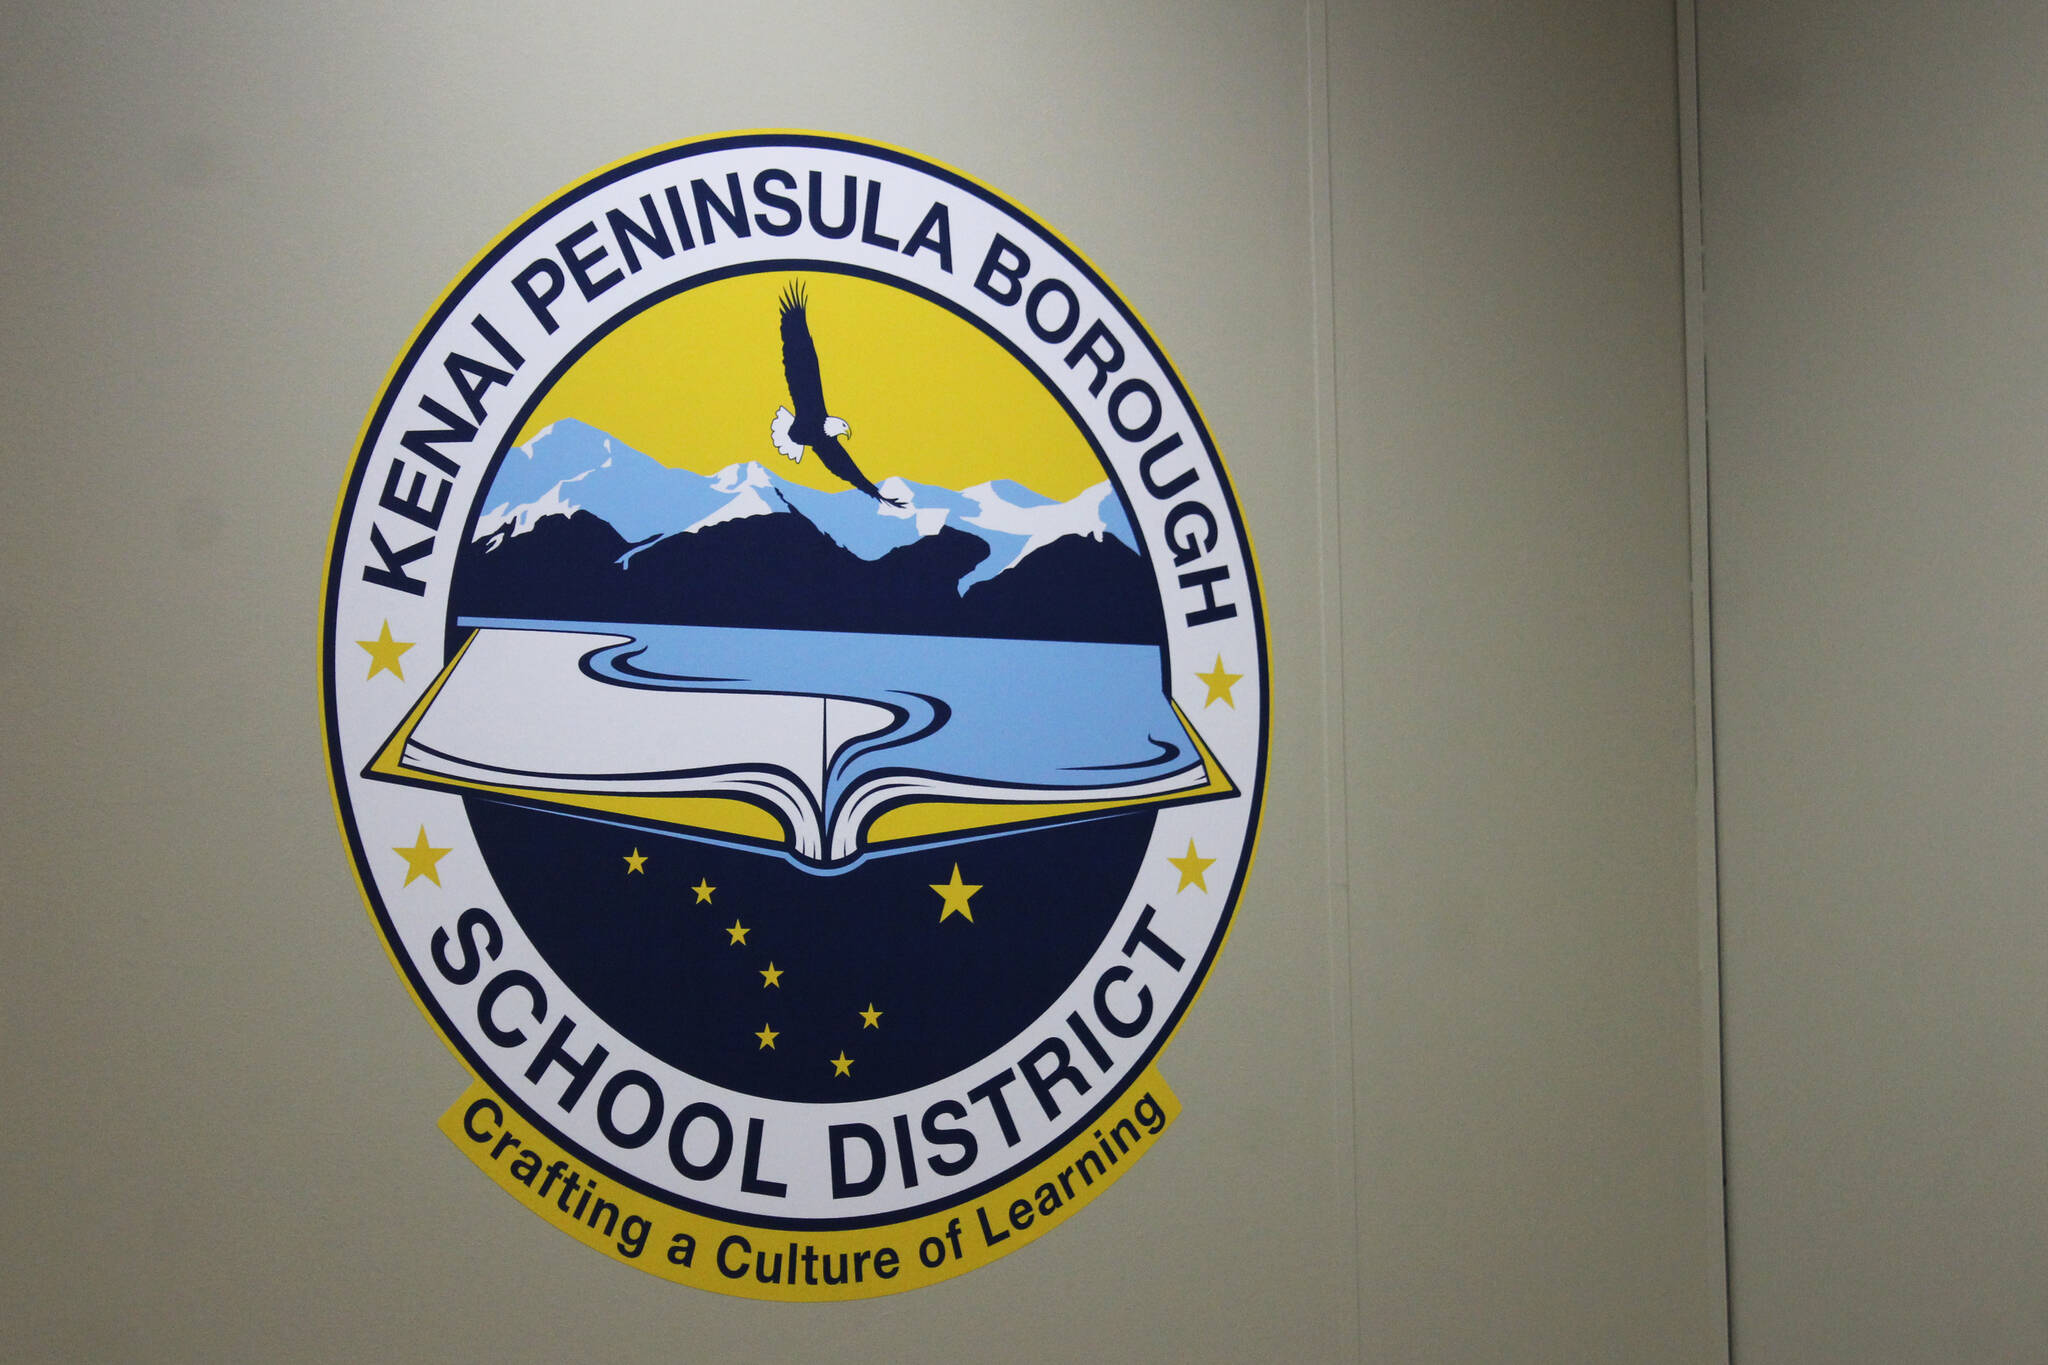 School district to begin replacing classroom technology following board ...